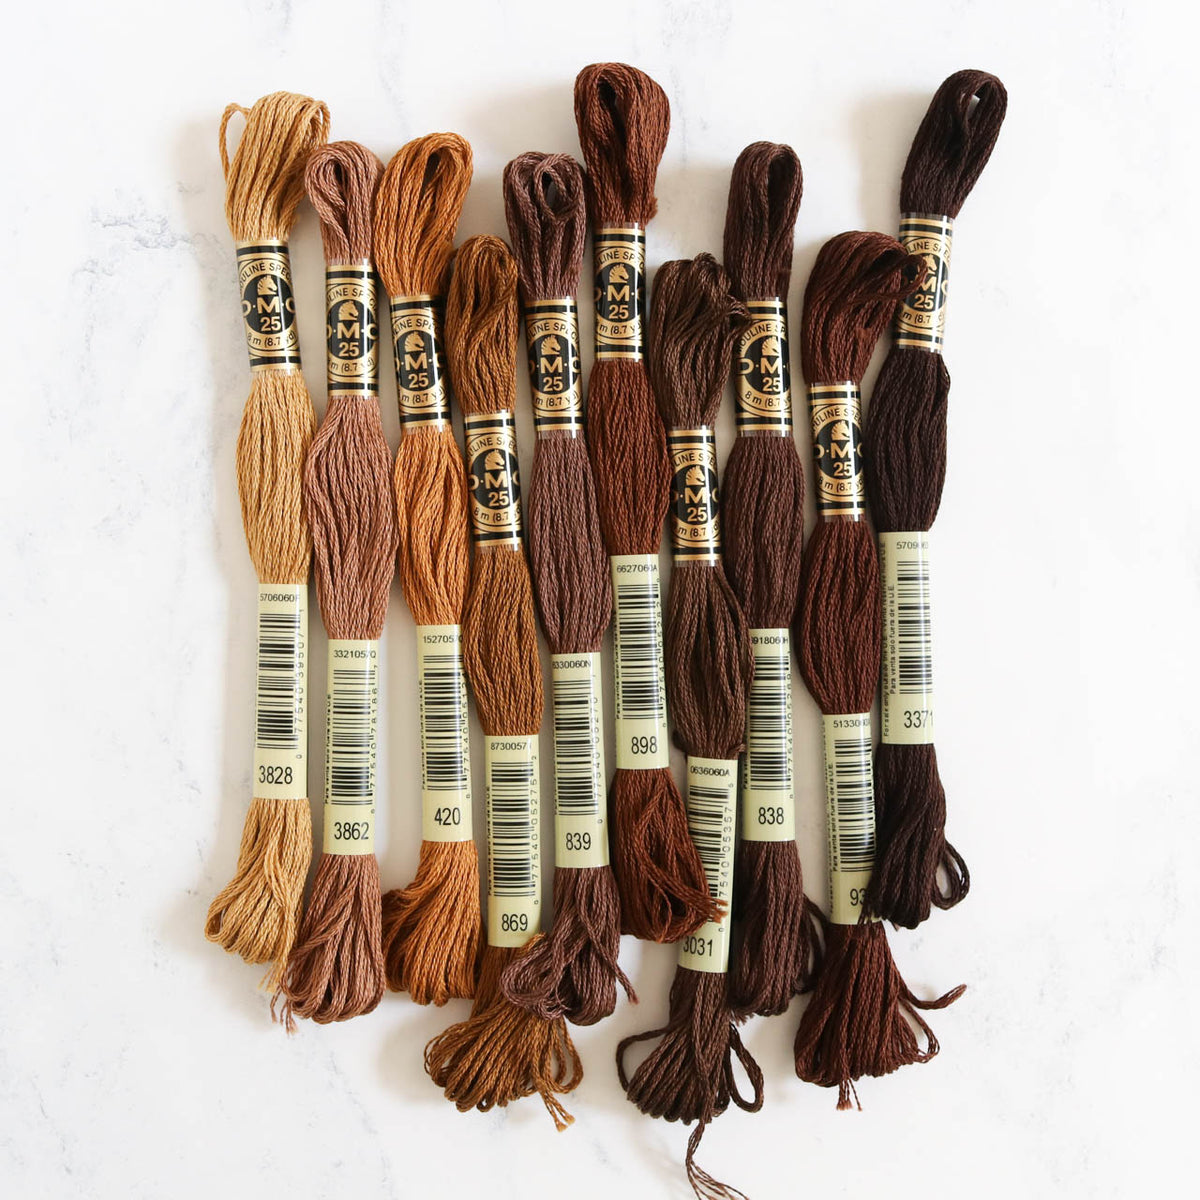 Thread Collection by Stitch People - Brown Hair